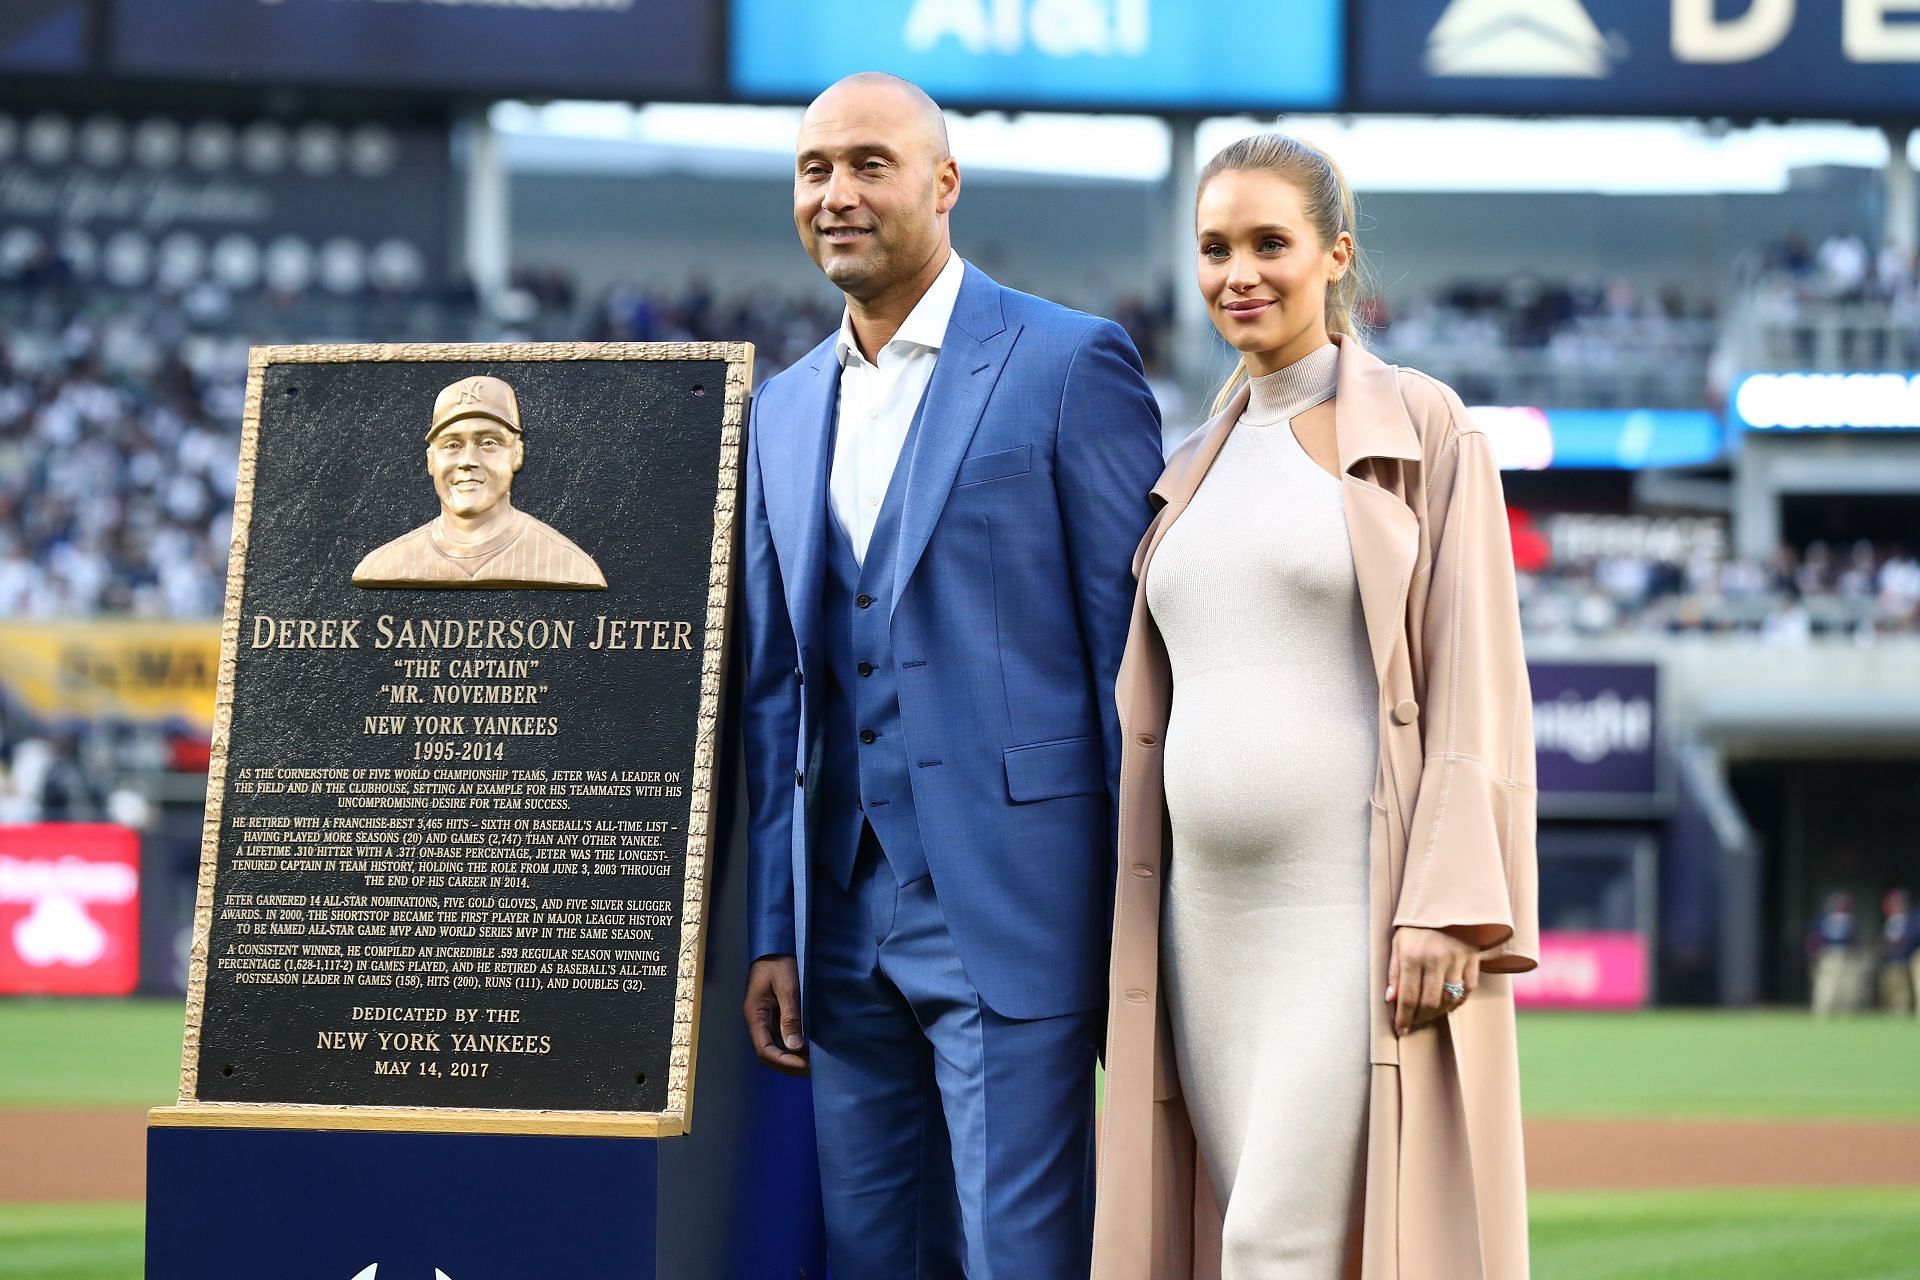 Derek Jeter poses with his wife Hannah Davis during his retirement ceremony at Yankee Stadium.